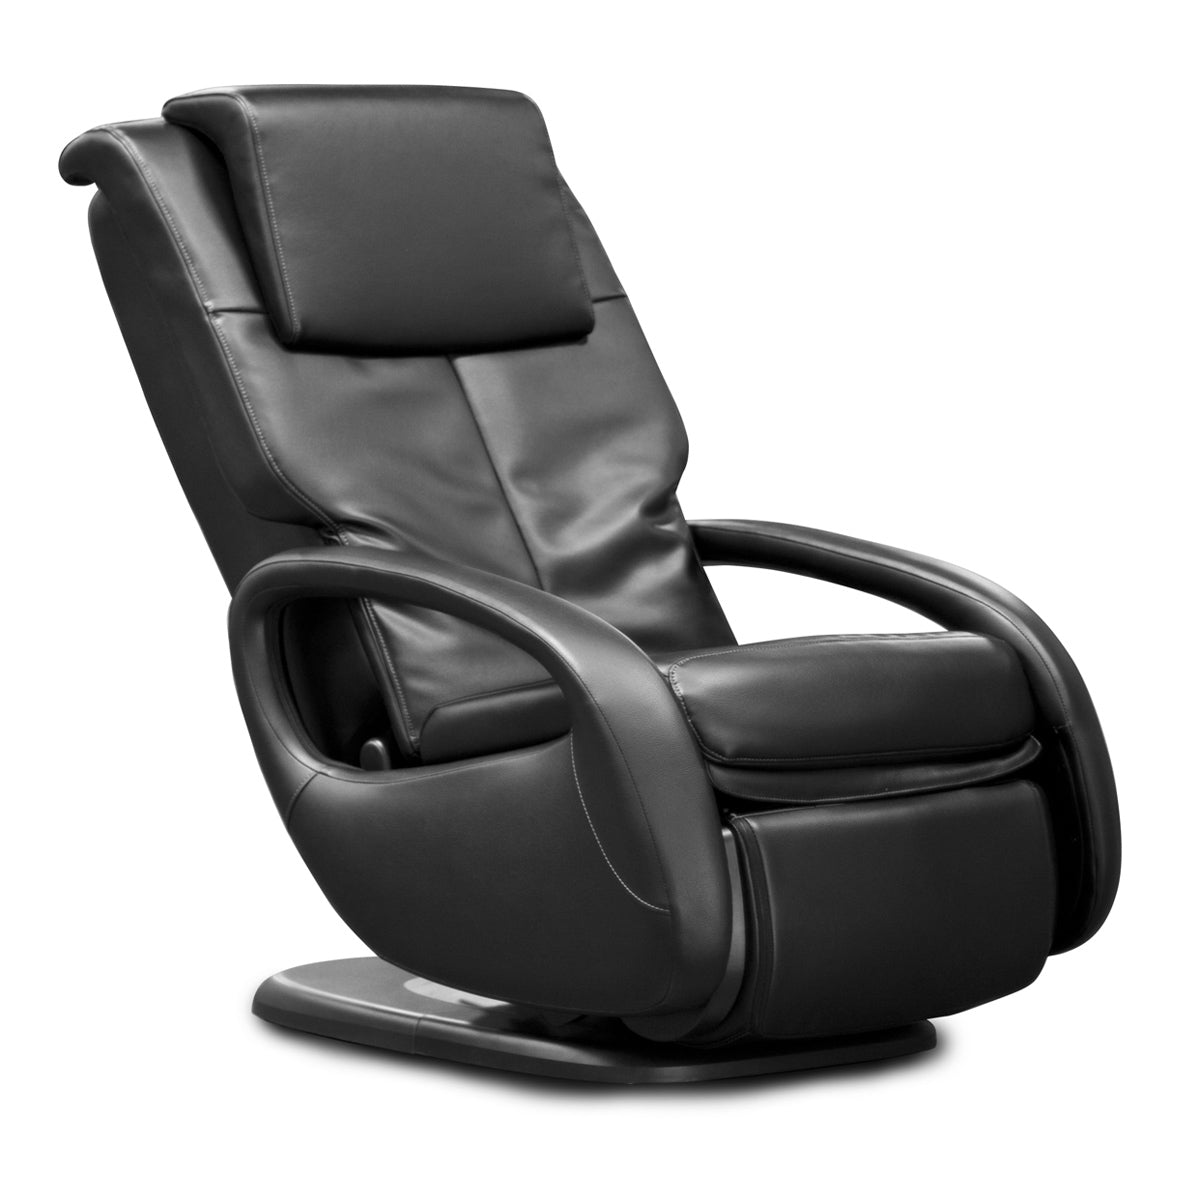 Human Touch WholeBody 5.1 Massage Chair Massage Chair Human Touch Black Standard (Free) 